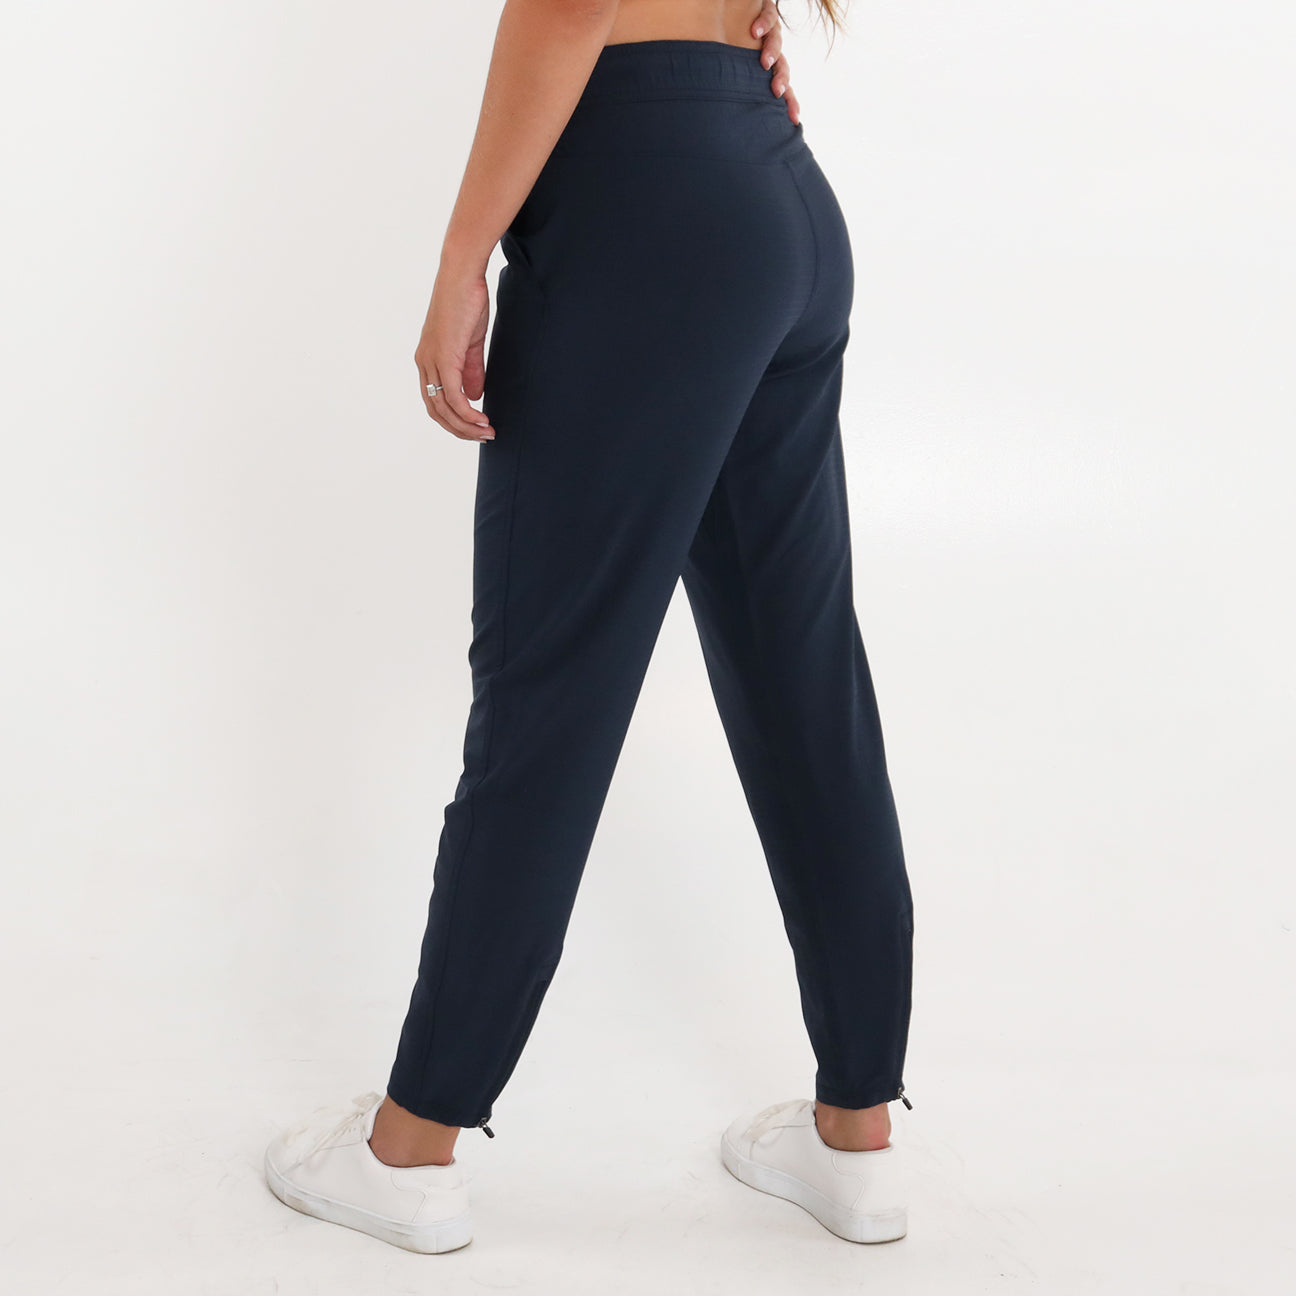 LADIES SOLUTION JOGGER - NAVY HEATHER – AndersonOrd Performance